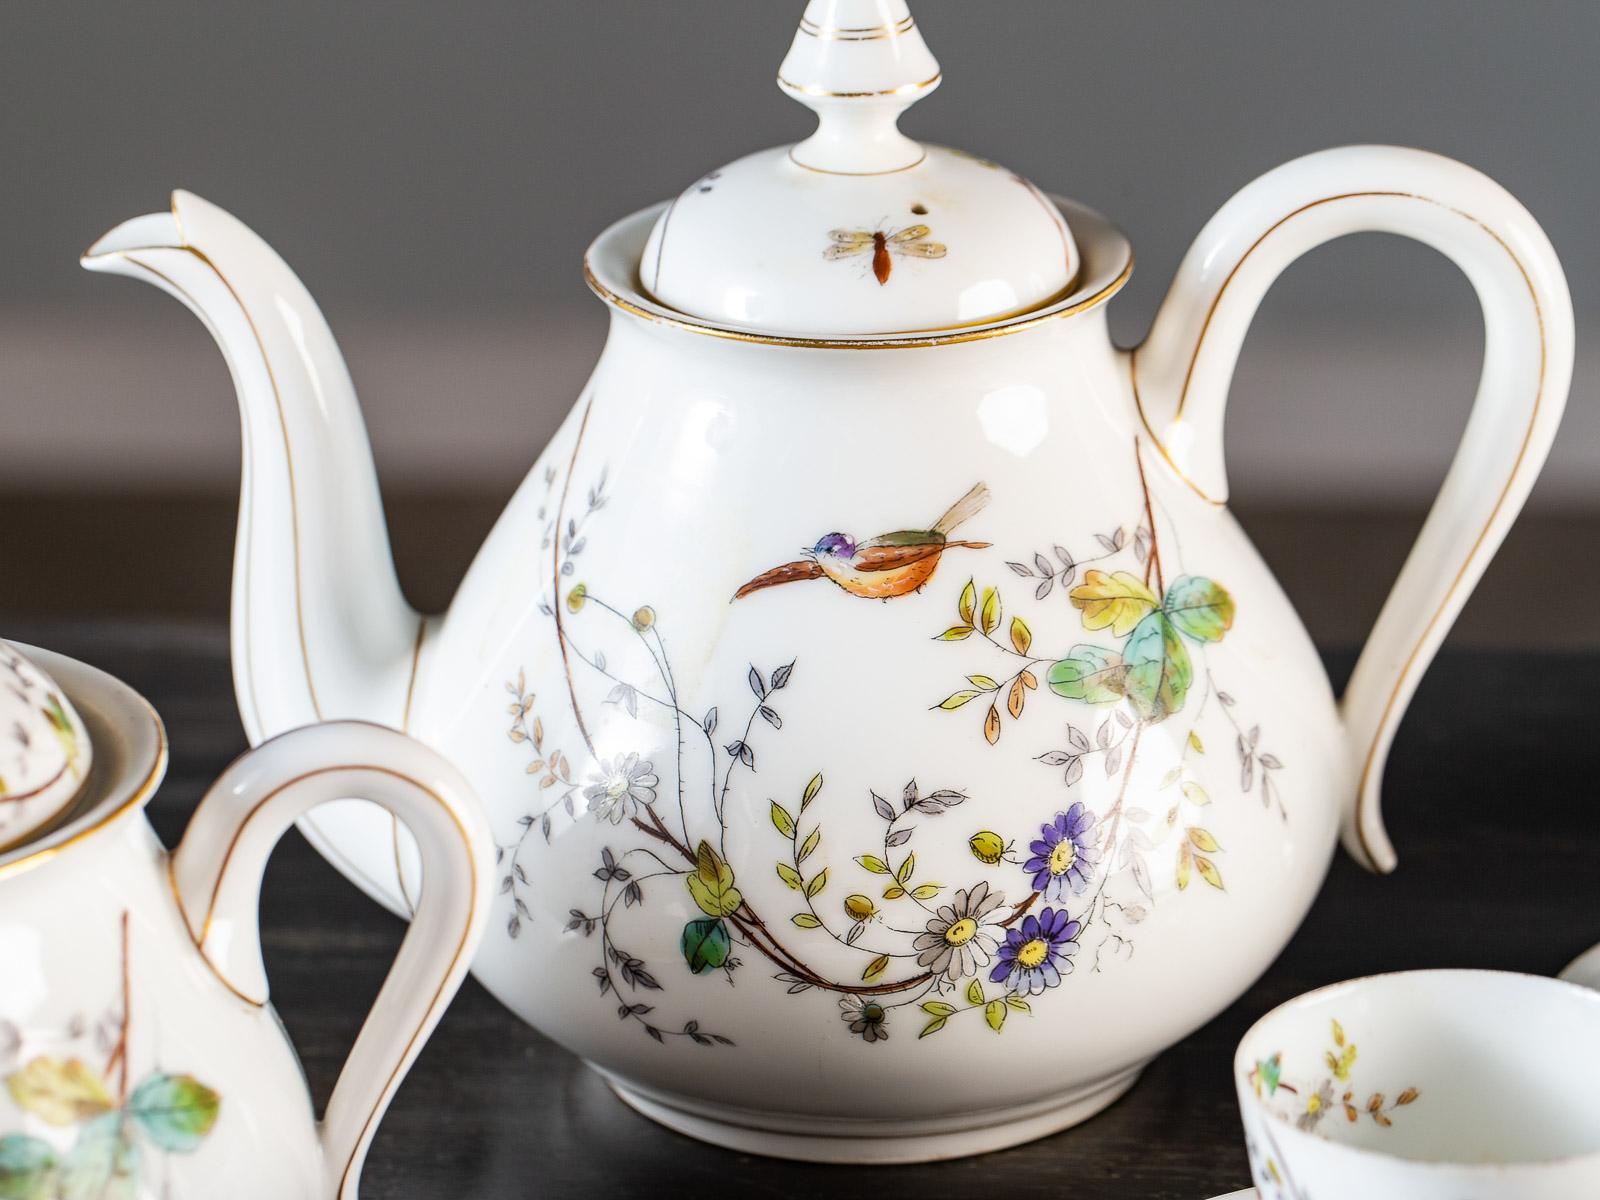 This hand painted Louis Philippe period fine porcelain antique French tea set has the most exquisite and delicate details. Please notice the assymmetrical placement of the flowers and insects across the surface of the porcelain. Each cup not only